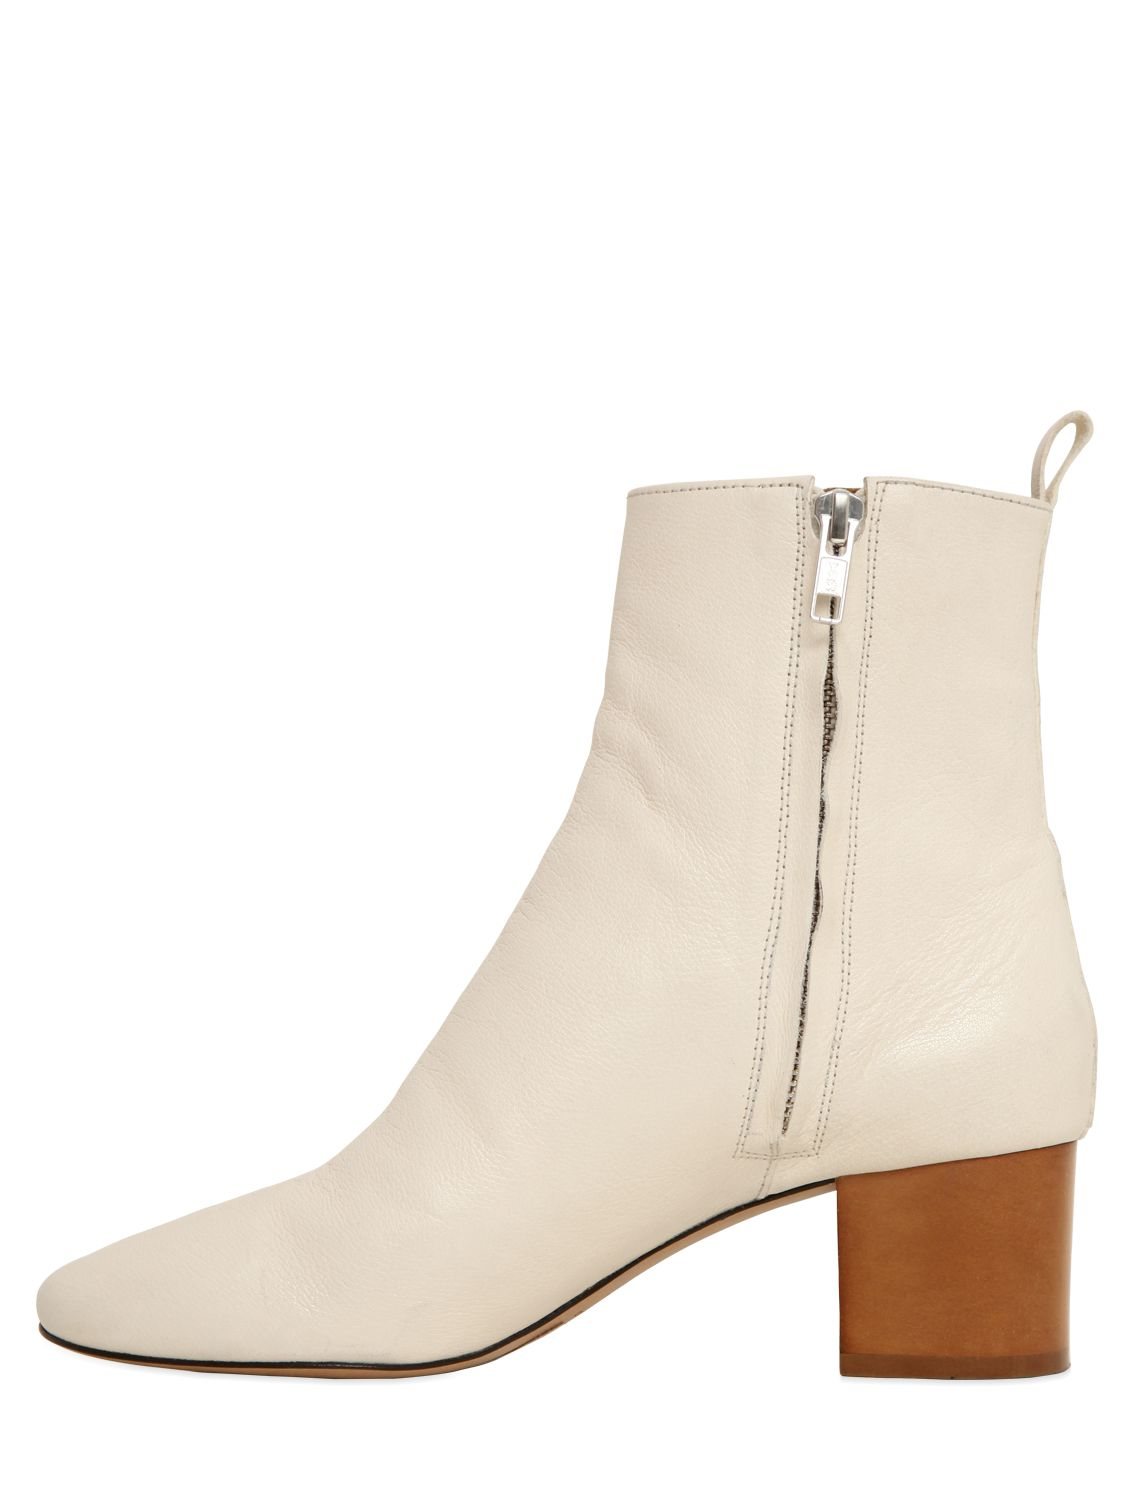 Rodeo Ropers Cowboy Boots: Isabel Marant White Boots